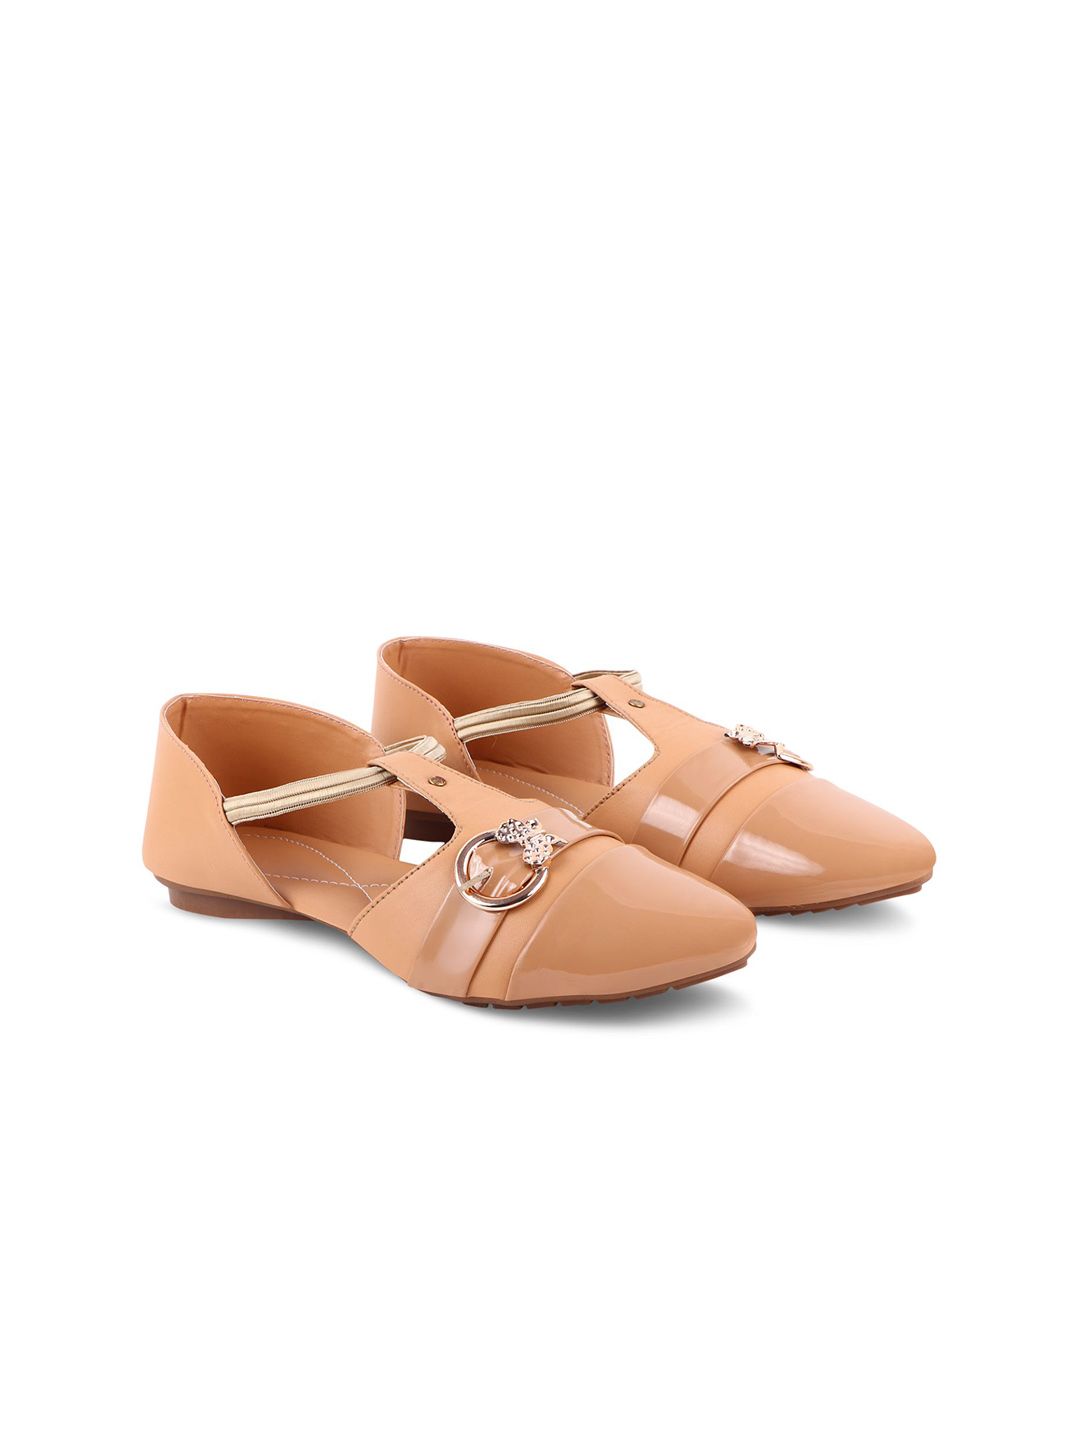 BAESD Girls Embellished Pointed Toe Ballerinas Price in India